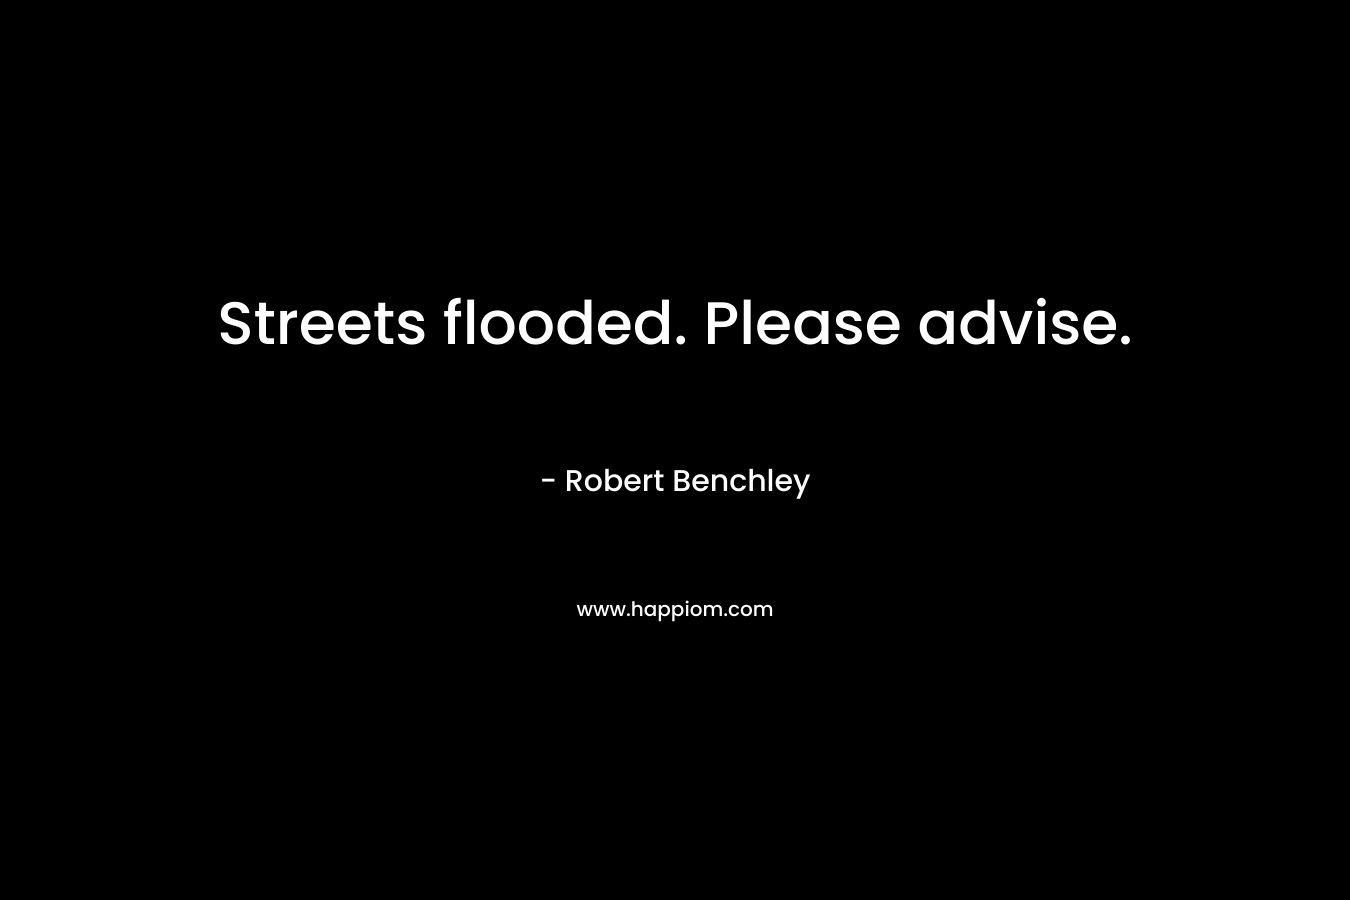 Streets flooded. Please advise. – Robert Benchley